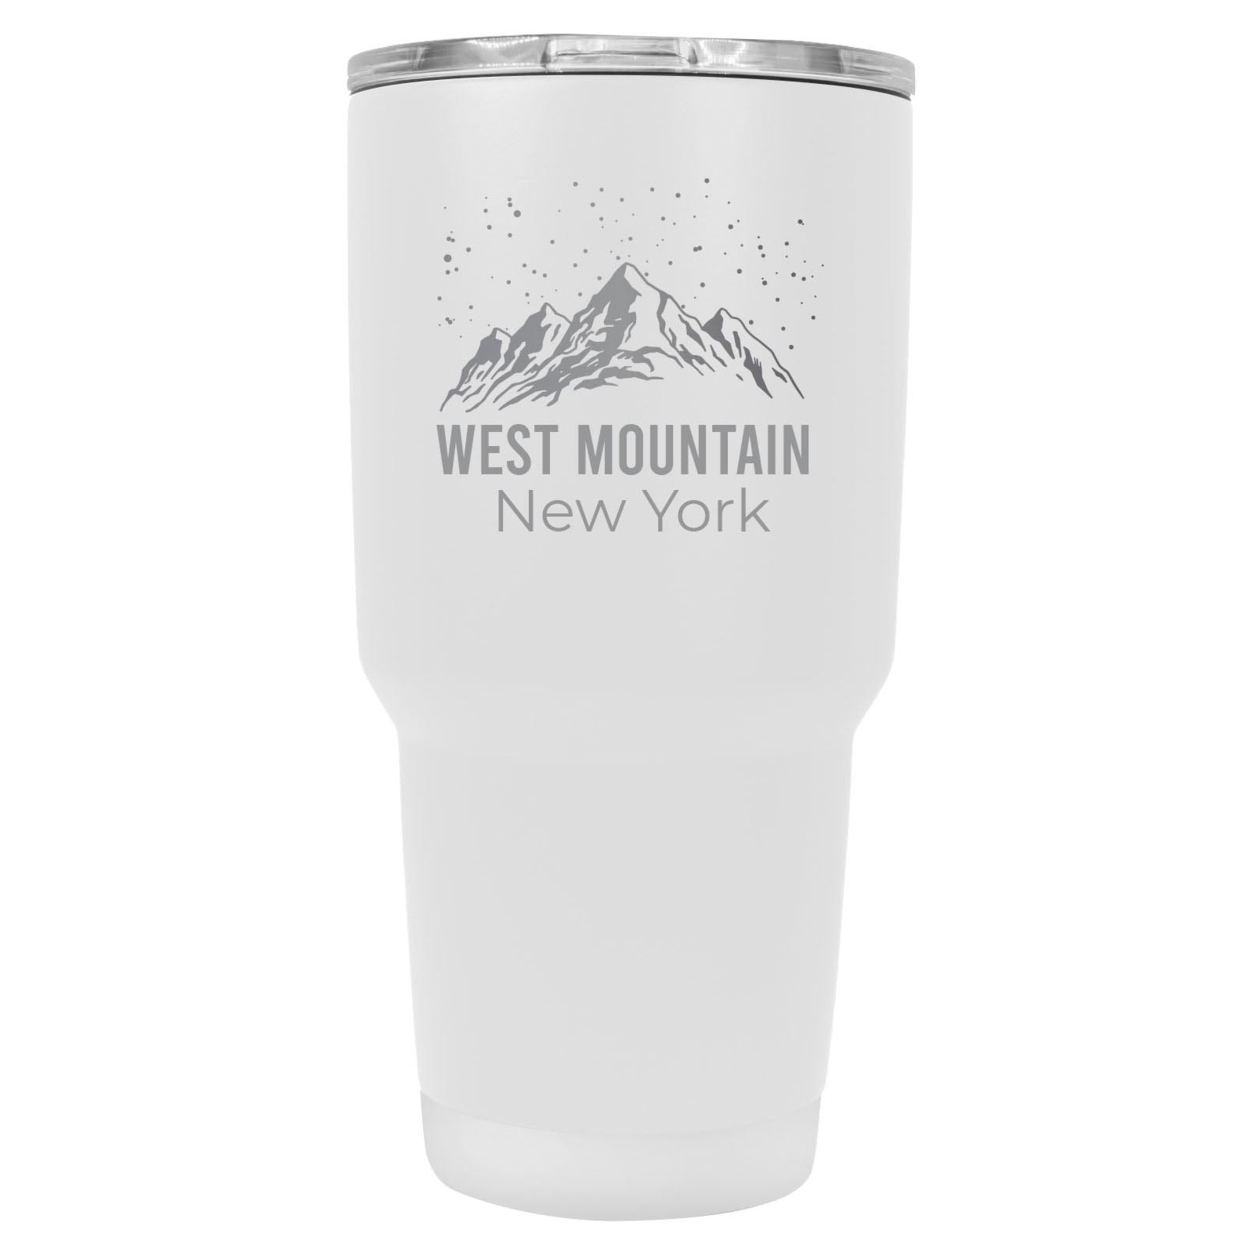 West Mountain New York Ski Snowboard Winter Souvenir Laser Engraved 24 Oz Insulated Stainless Steel Tumbler - Rose Gold